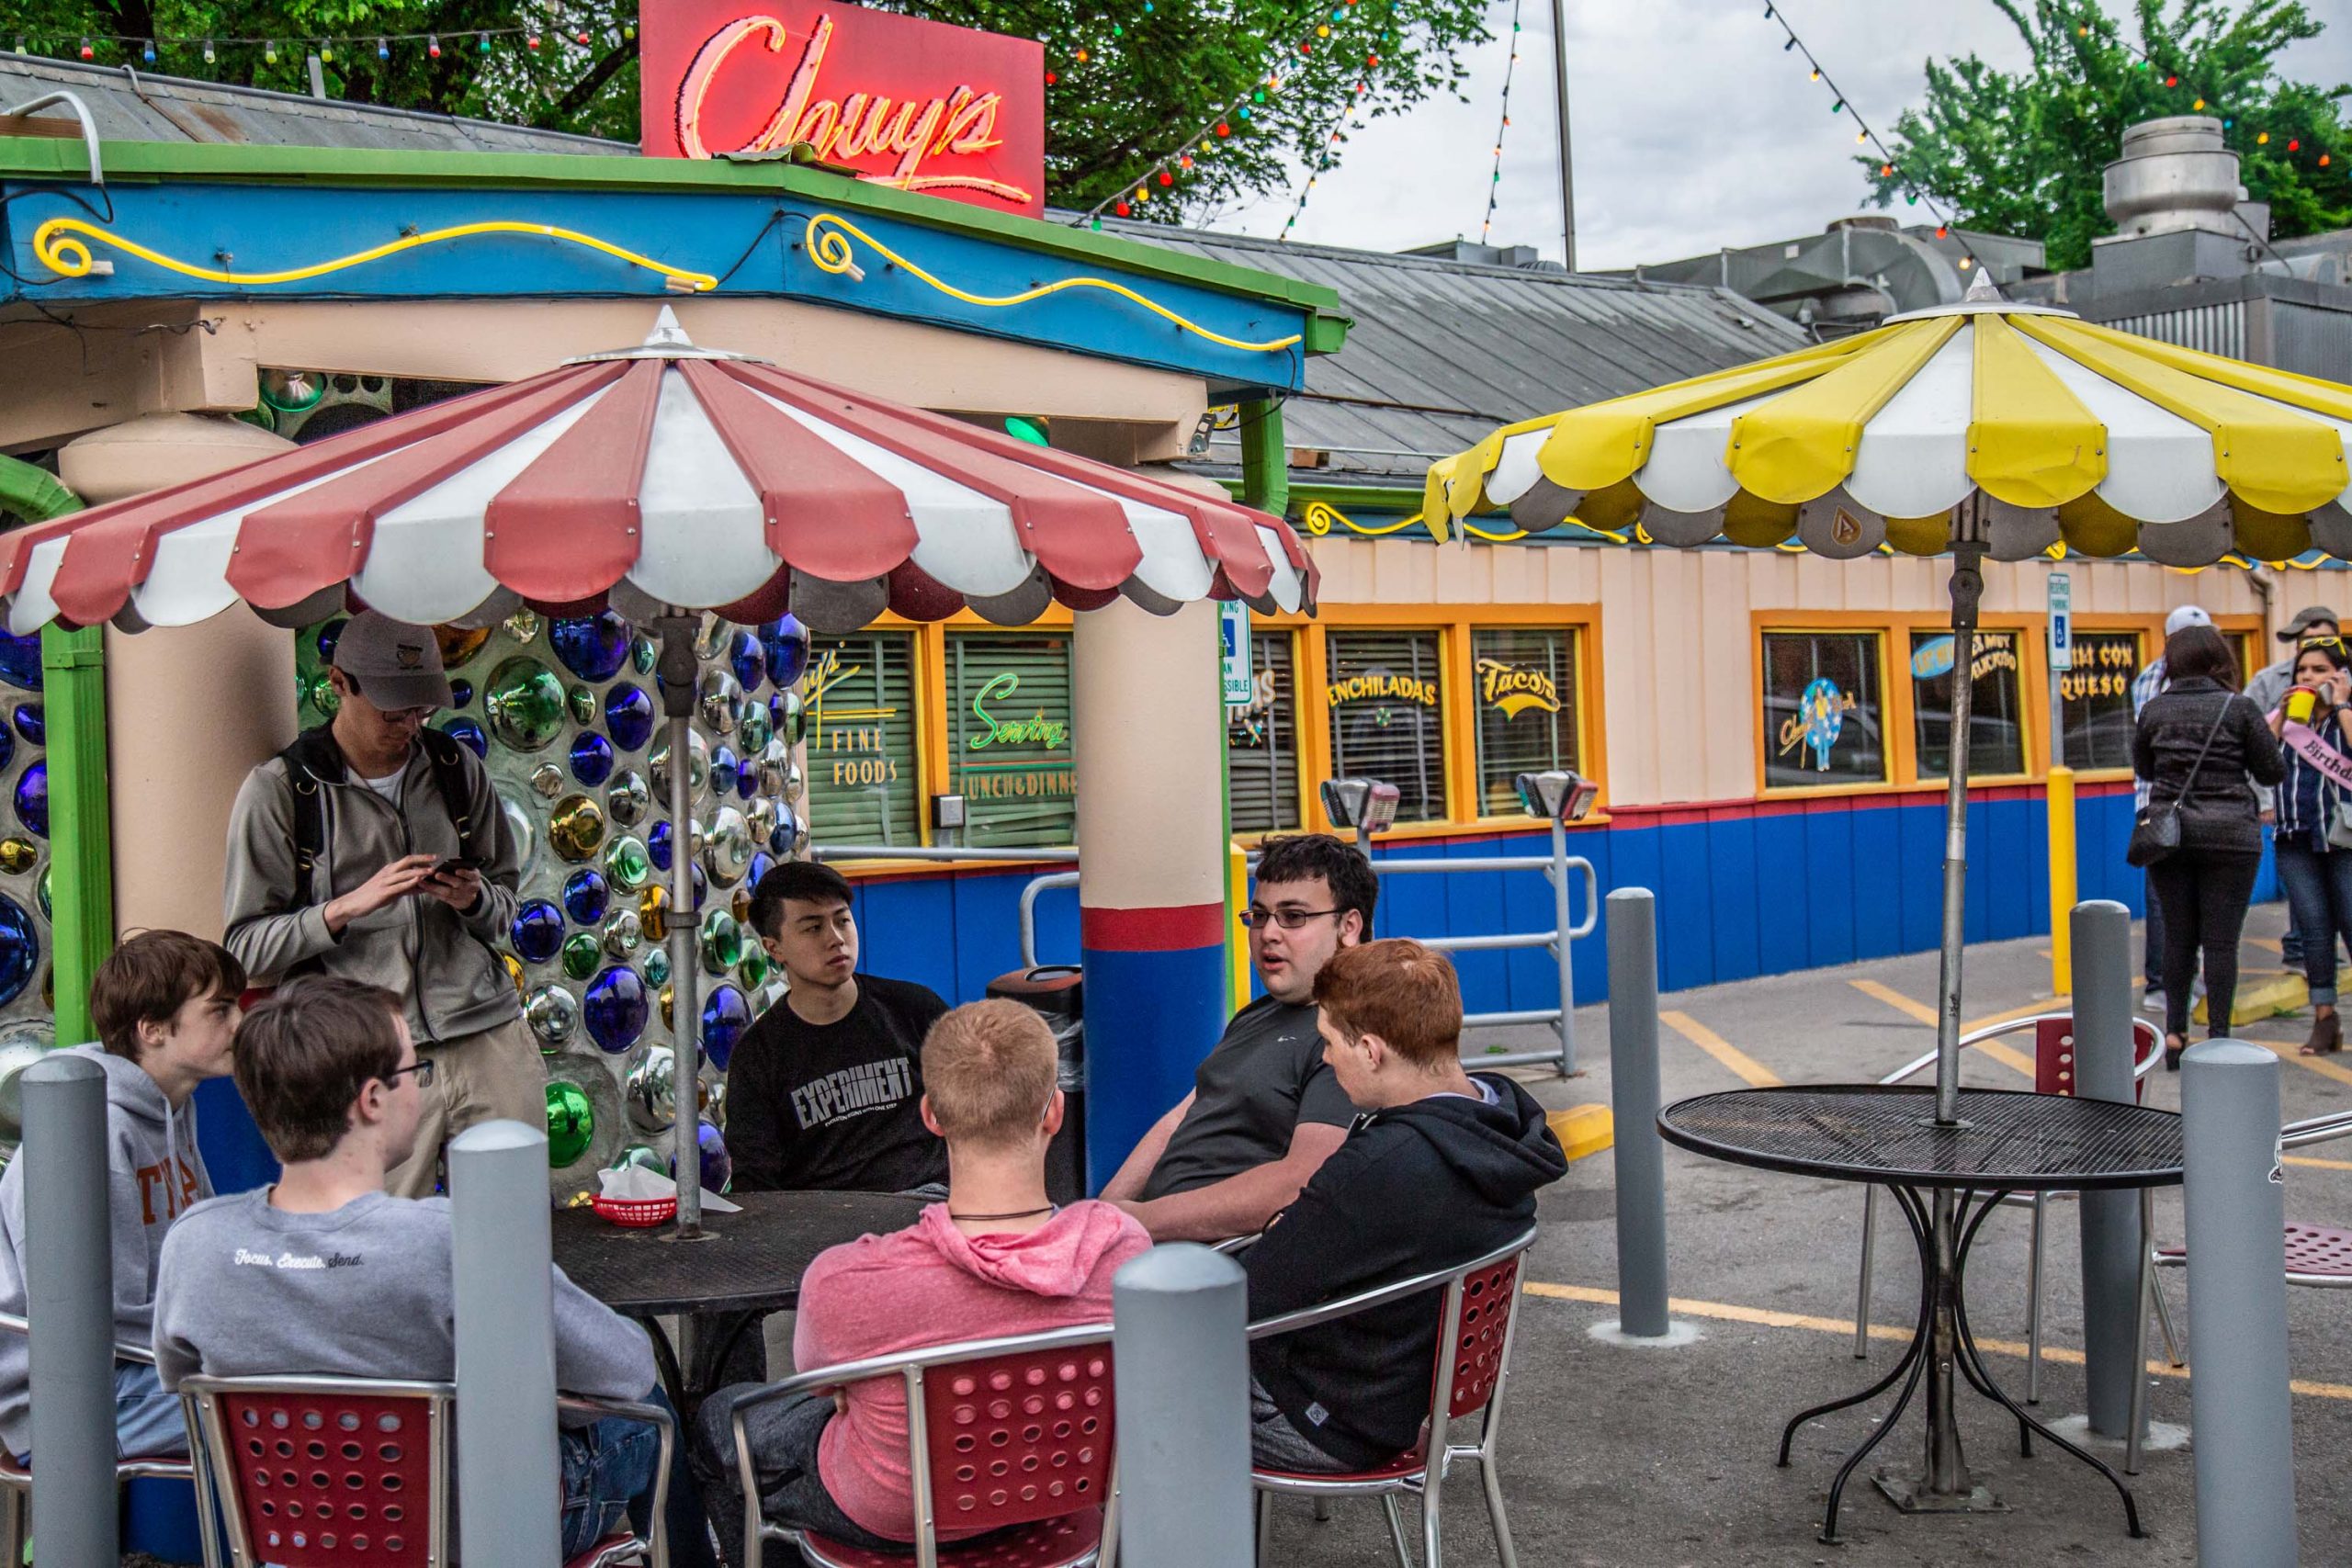 Dining al fresco out front at Chuy's on Barton Springs. Photo: Will Taylor - LostinAustin.org